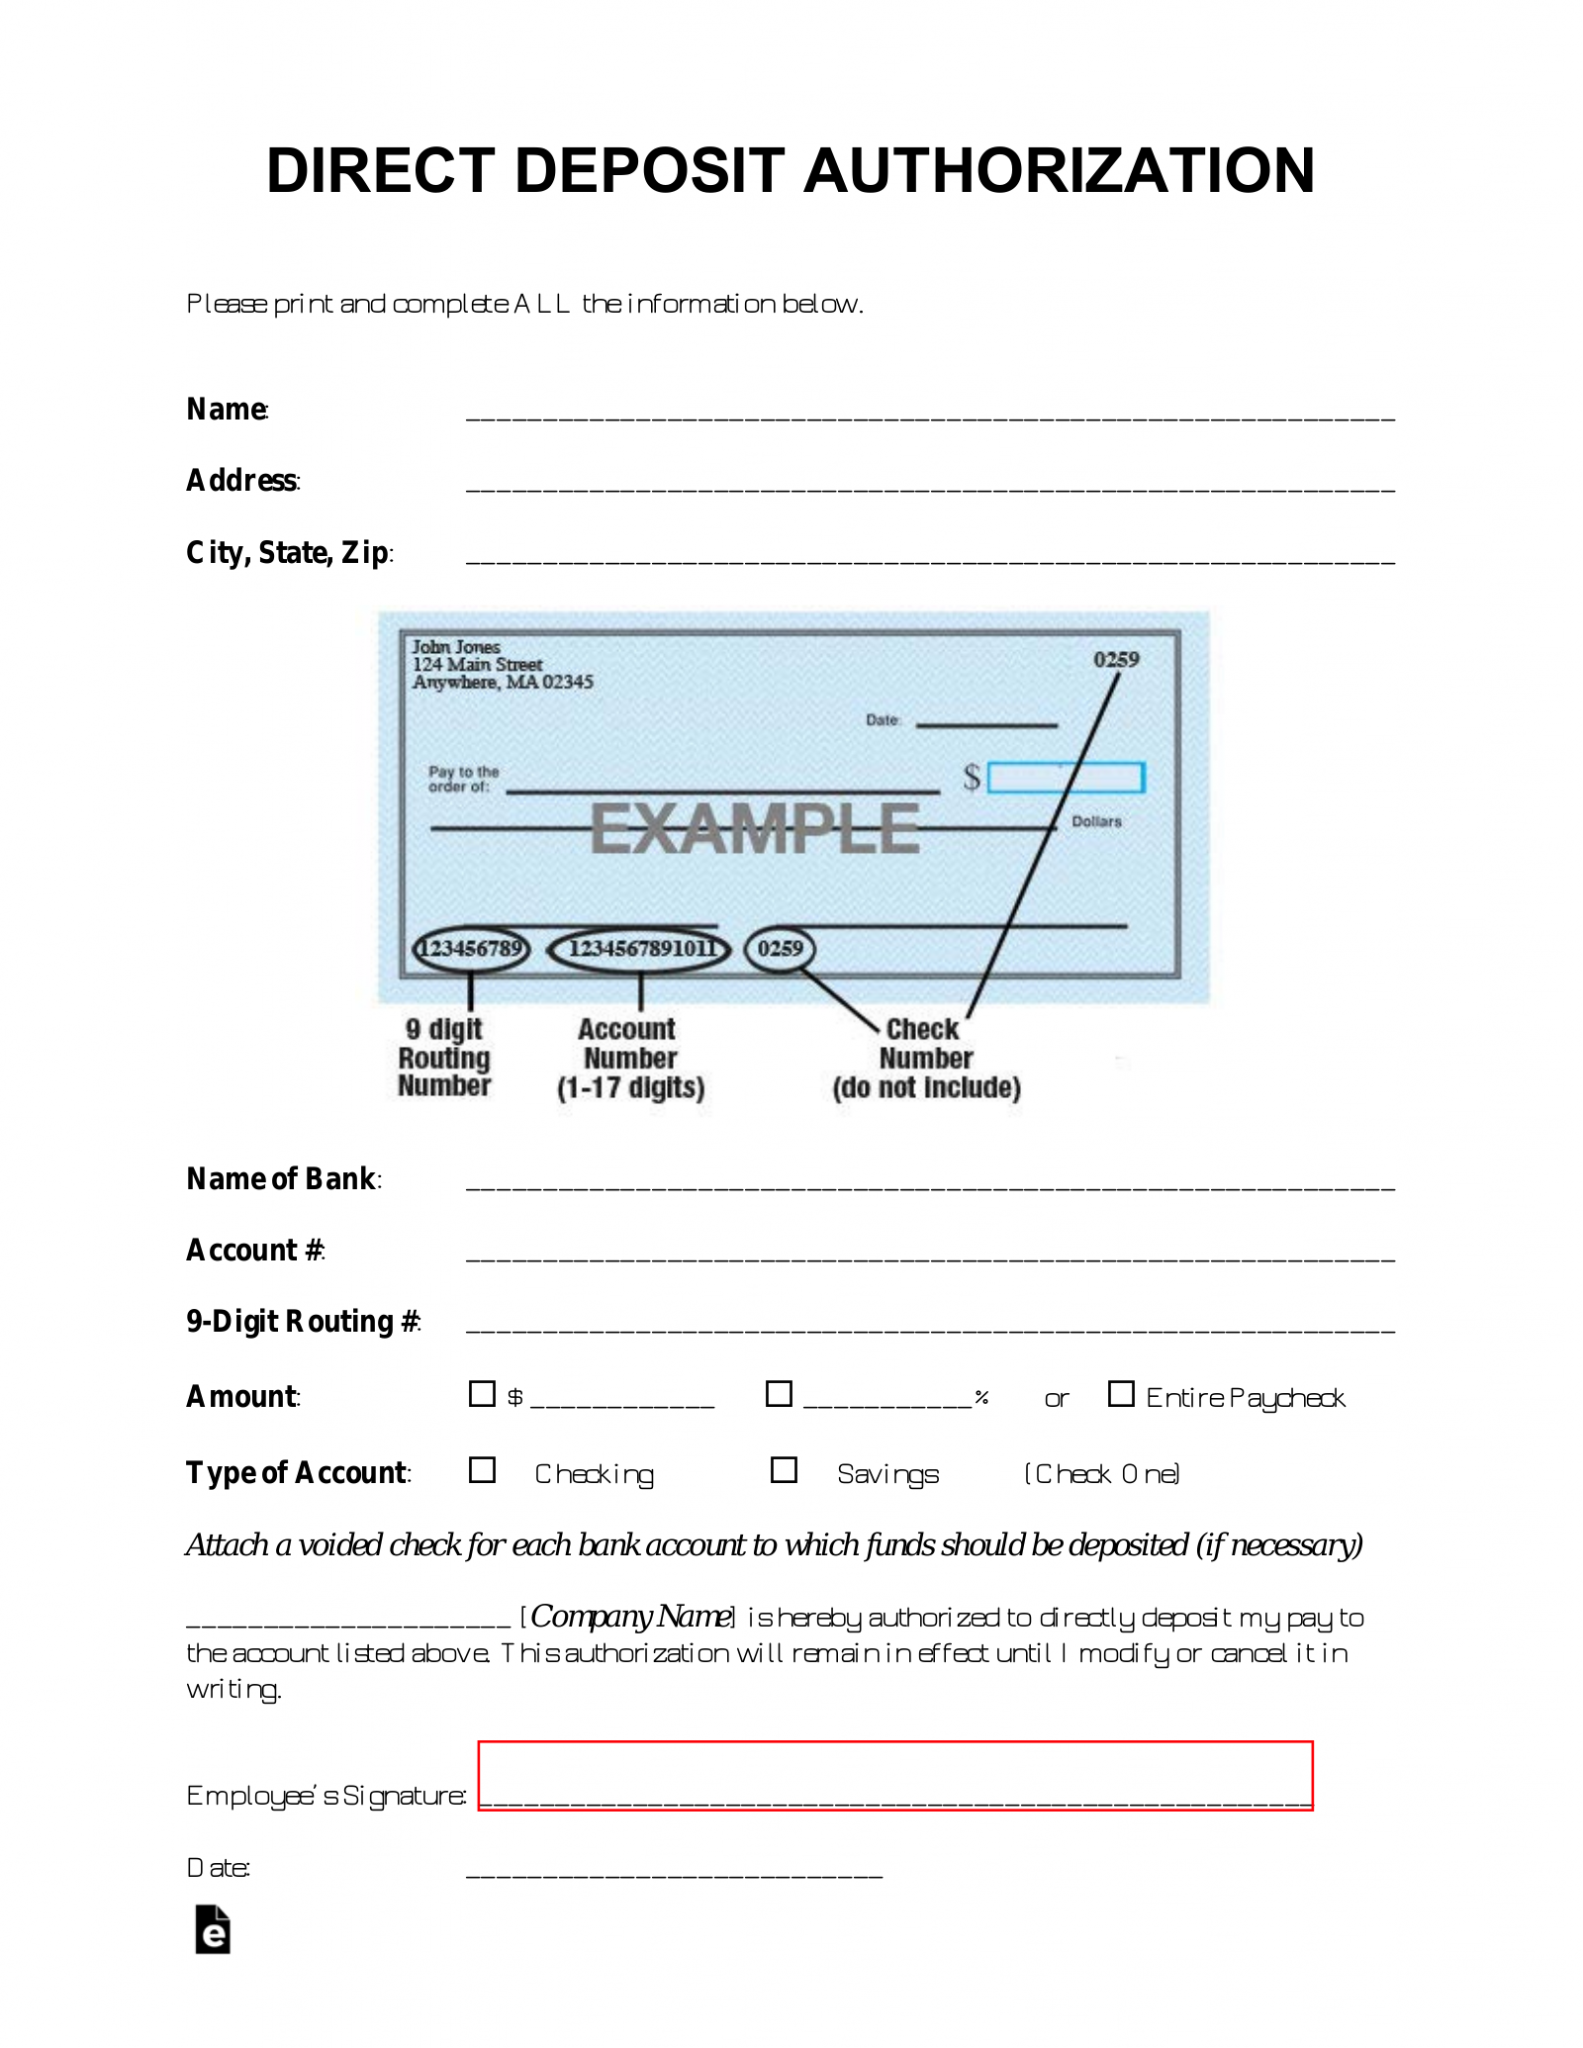 free-direct-deposit-authorization-forms-22-pdf-word-eforms